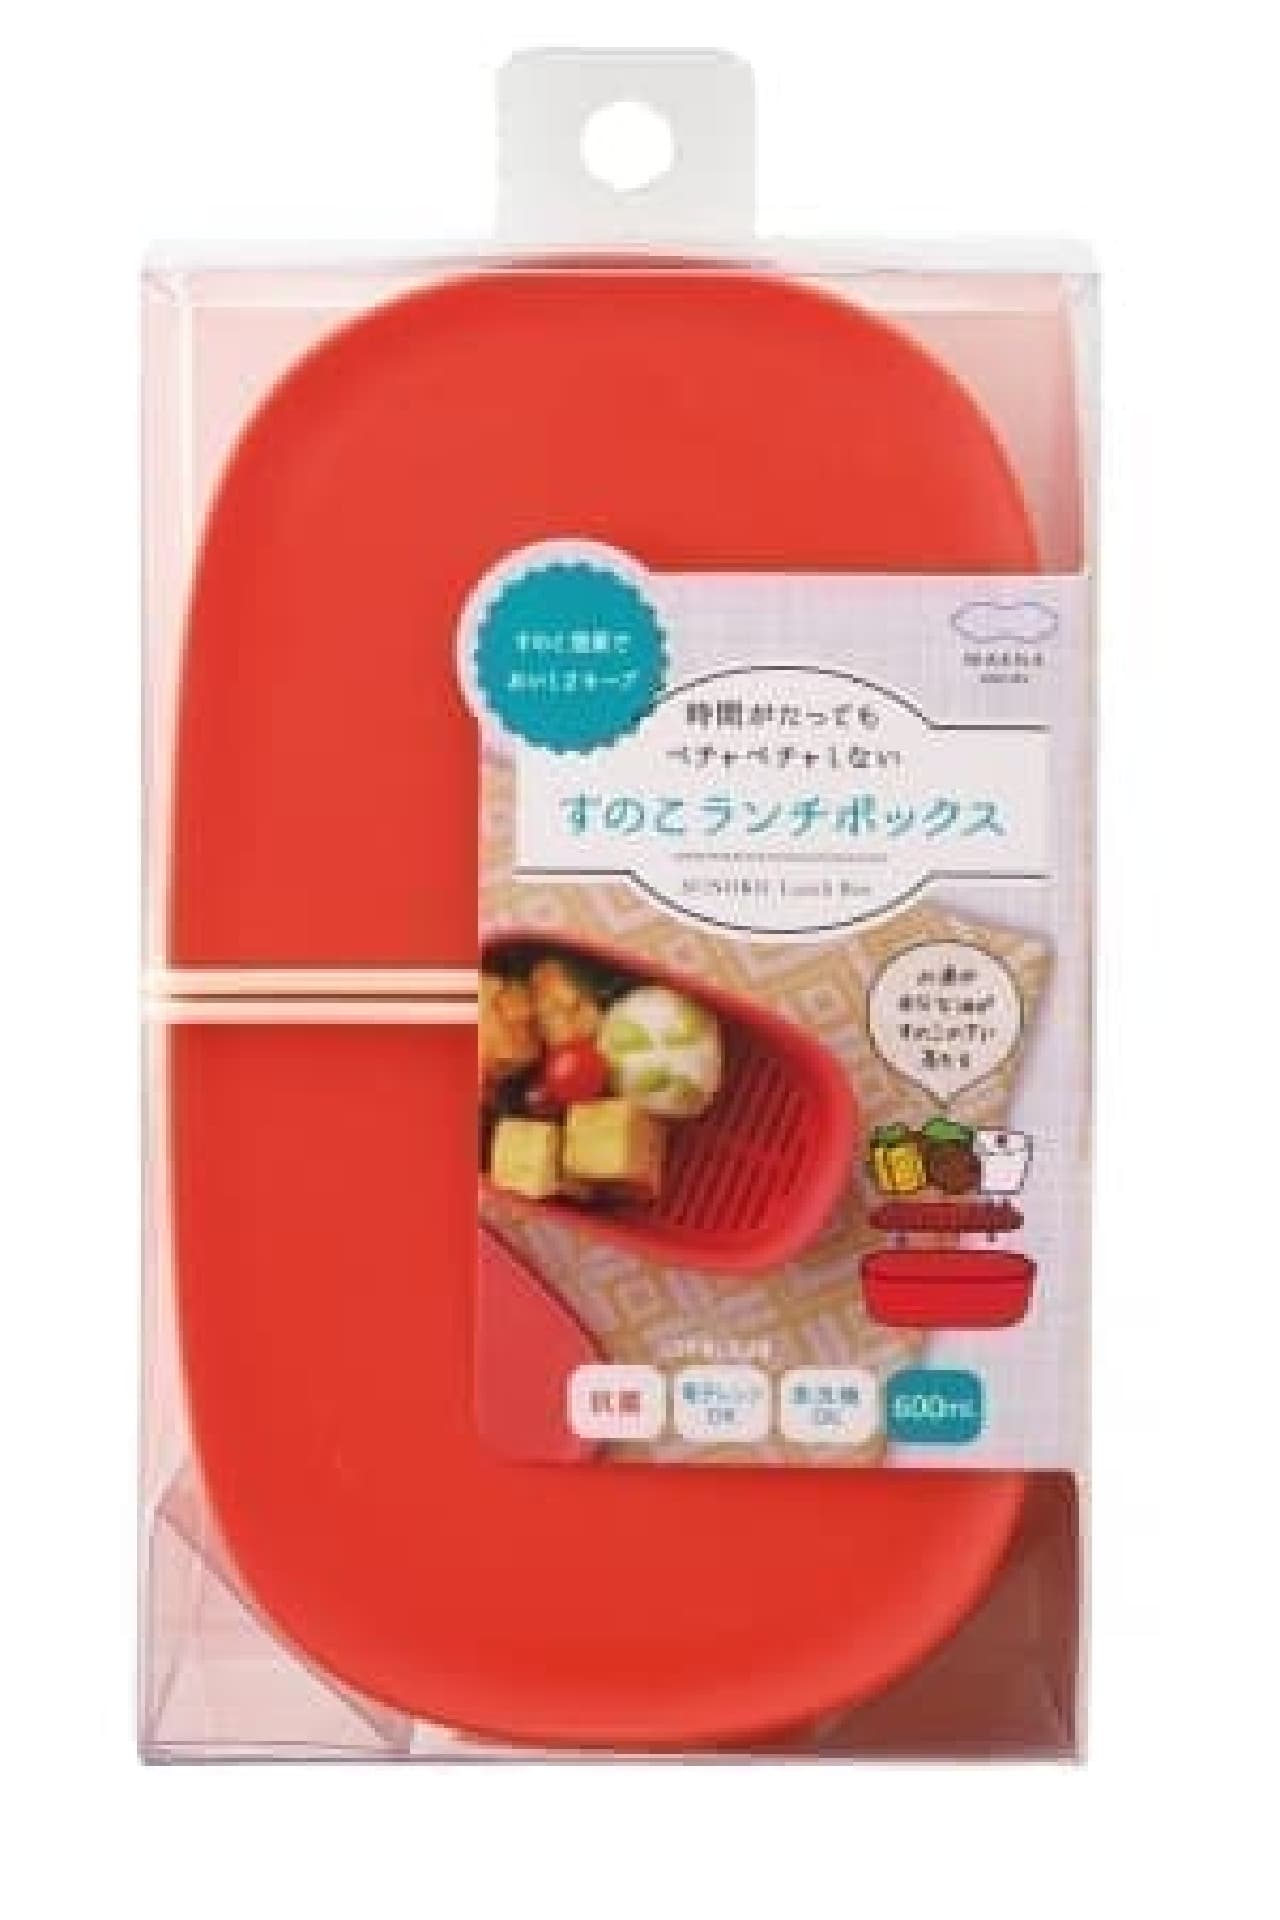 "Sunokko Lunch Box" to prevent sticky lunch boxes, etc .-- Convenient lunch box goods from Marna